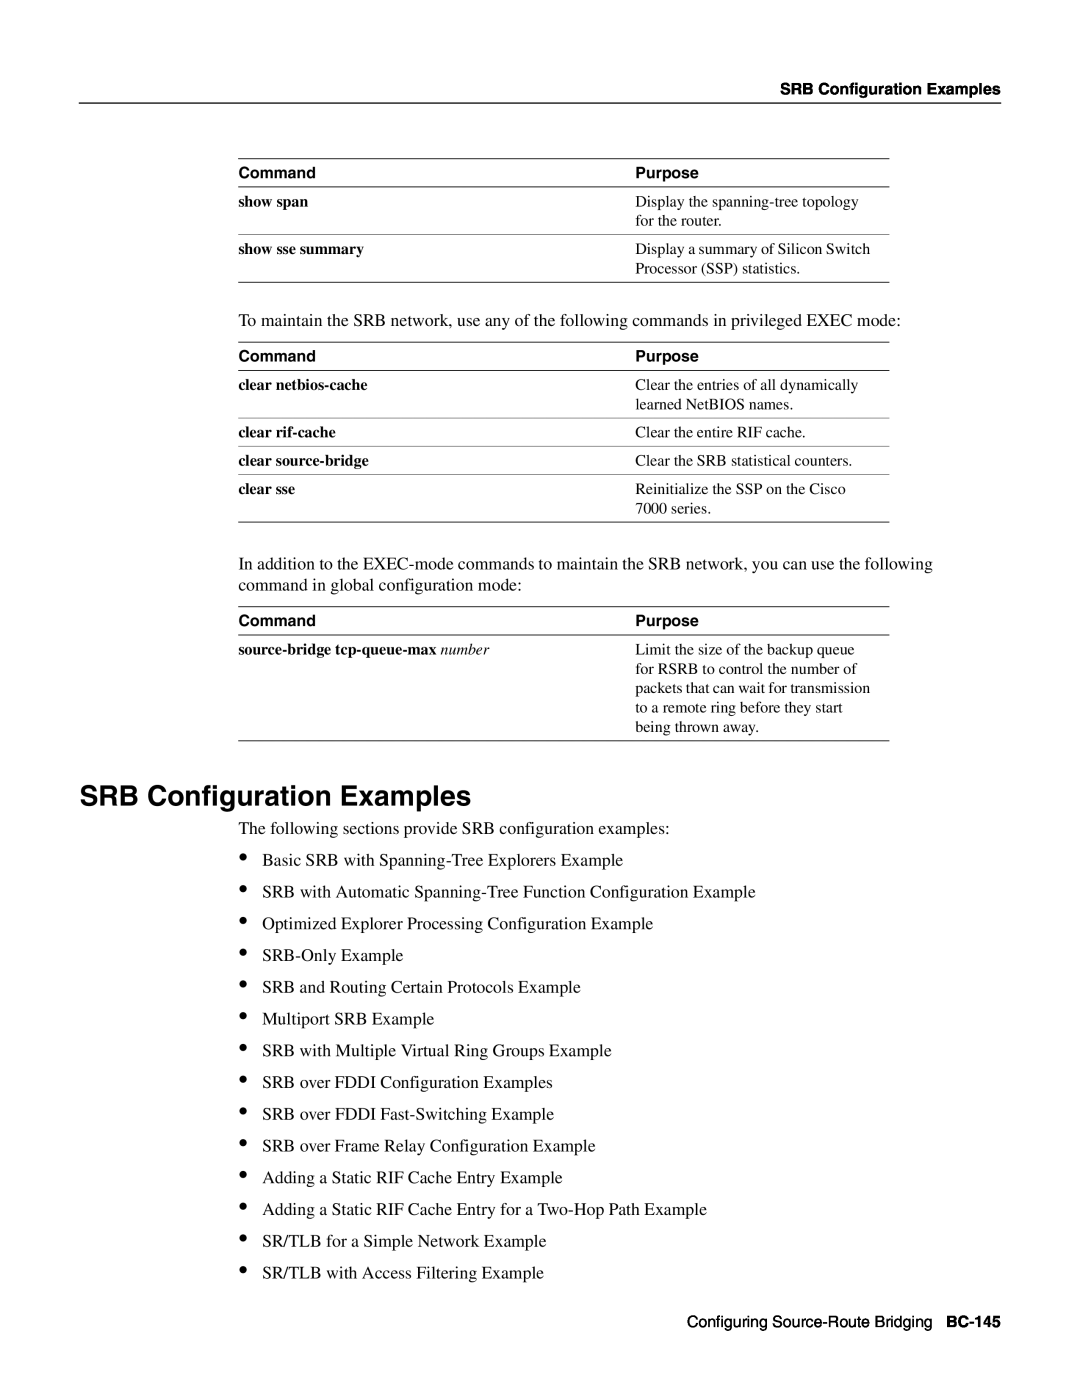 Cisco Systems BC-109 manual SRB Configuration Examples 